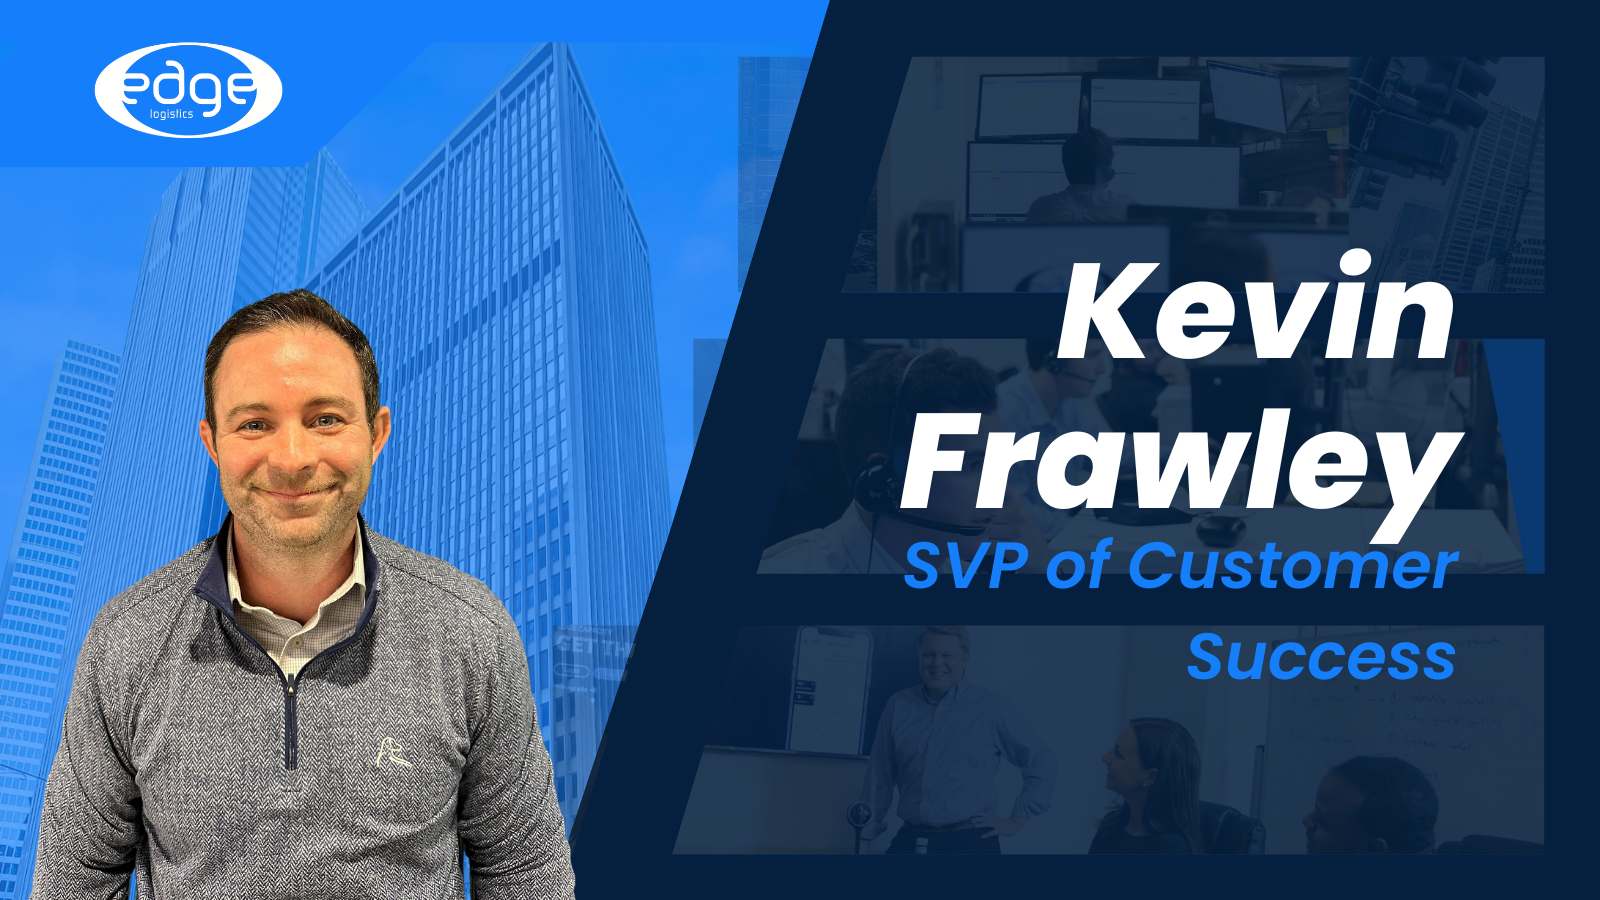 Edge Logistics Q&A: Get to Know Kevin Frawley, SVP of Customer Success